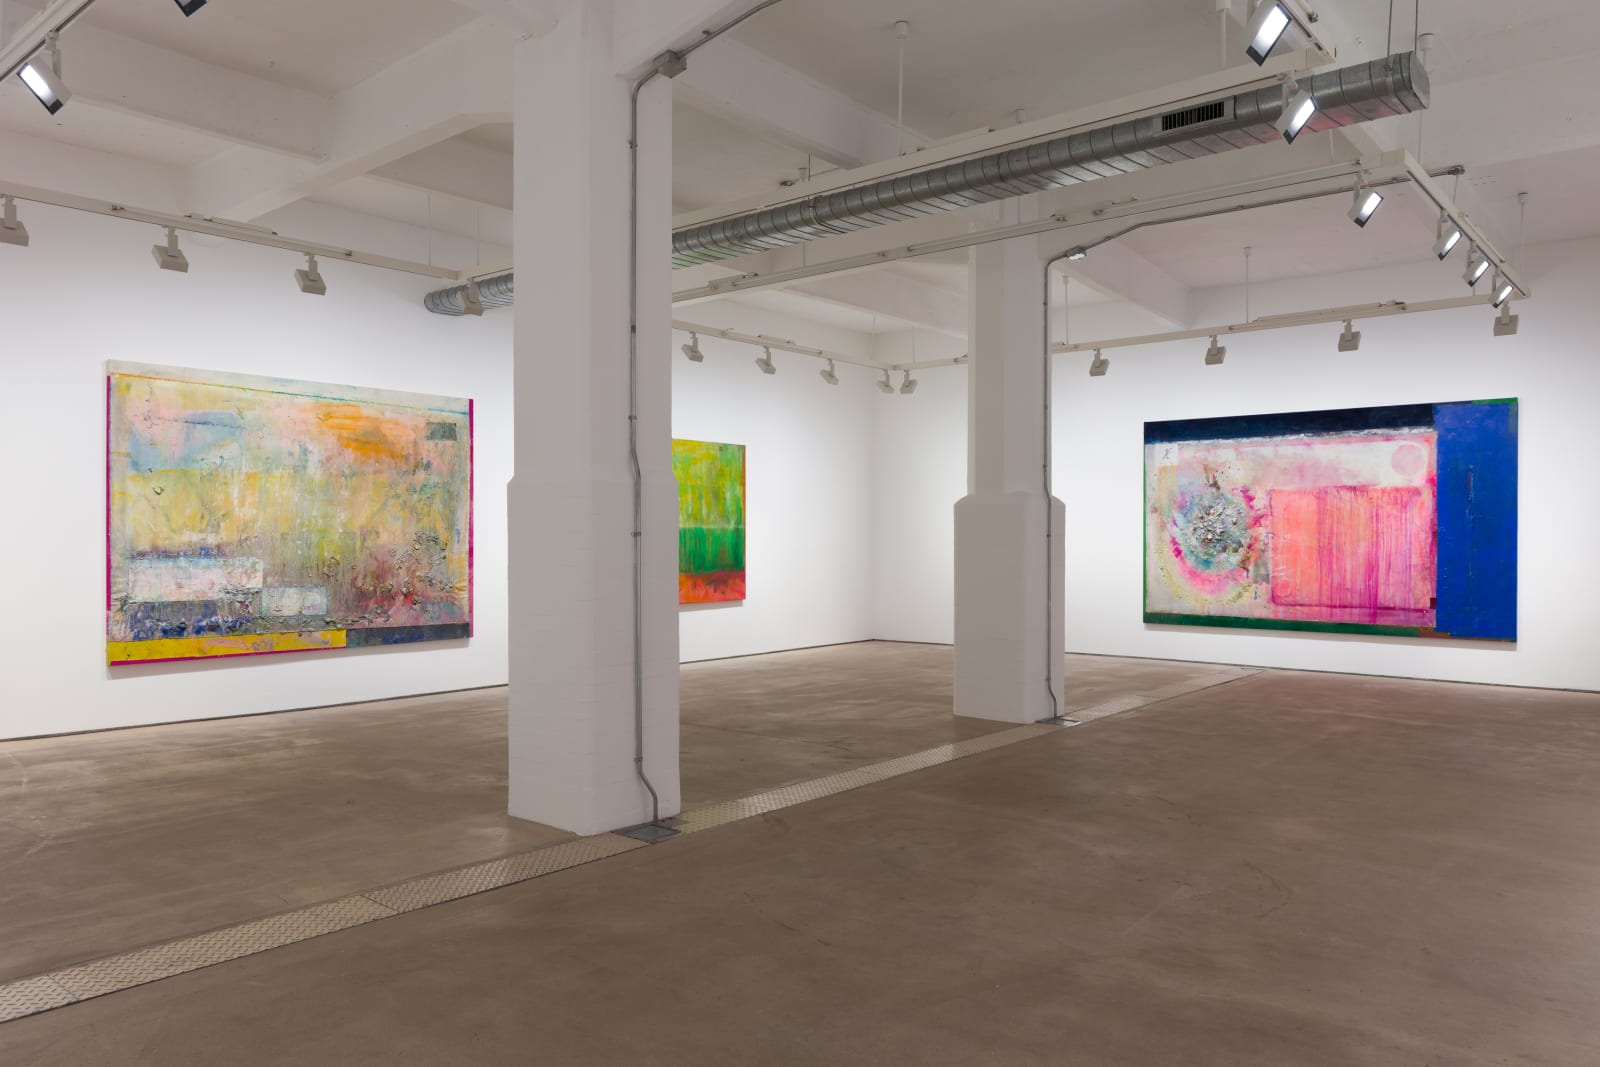 Frank Bowling, Installation view 'More Land than Landscape', Hales London, 10 May - 22 June 2019